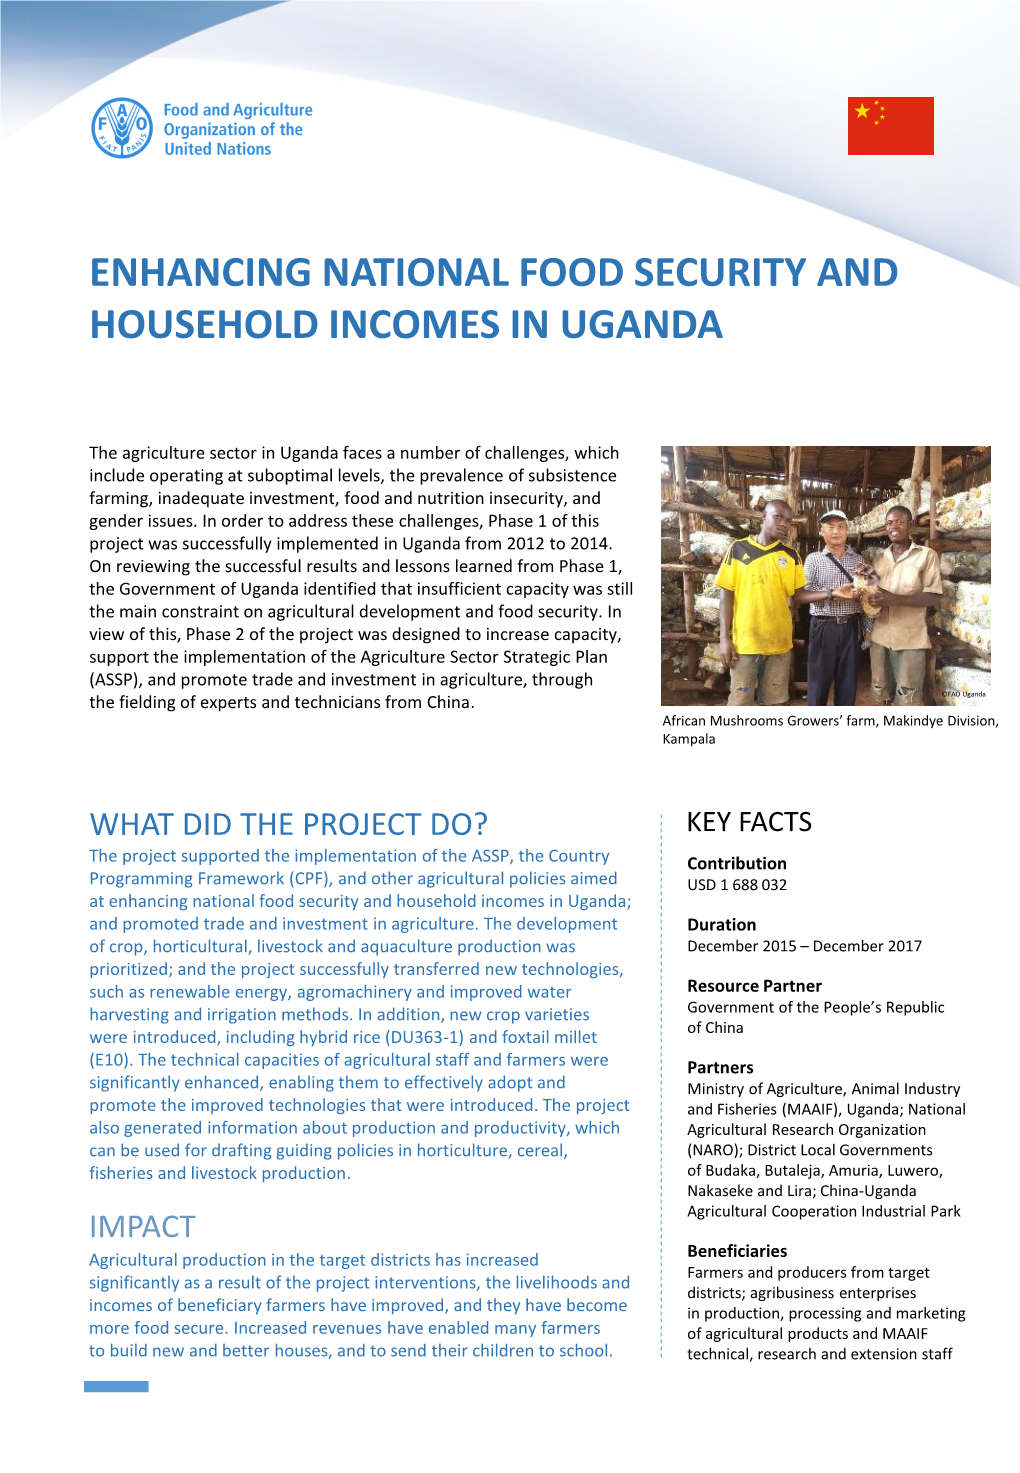 Enhancing National Food Security and Household Incomes in Uganda